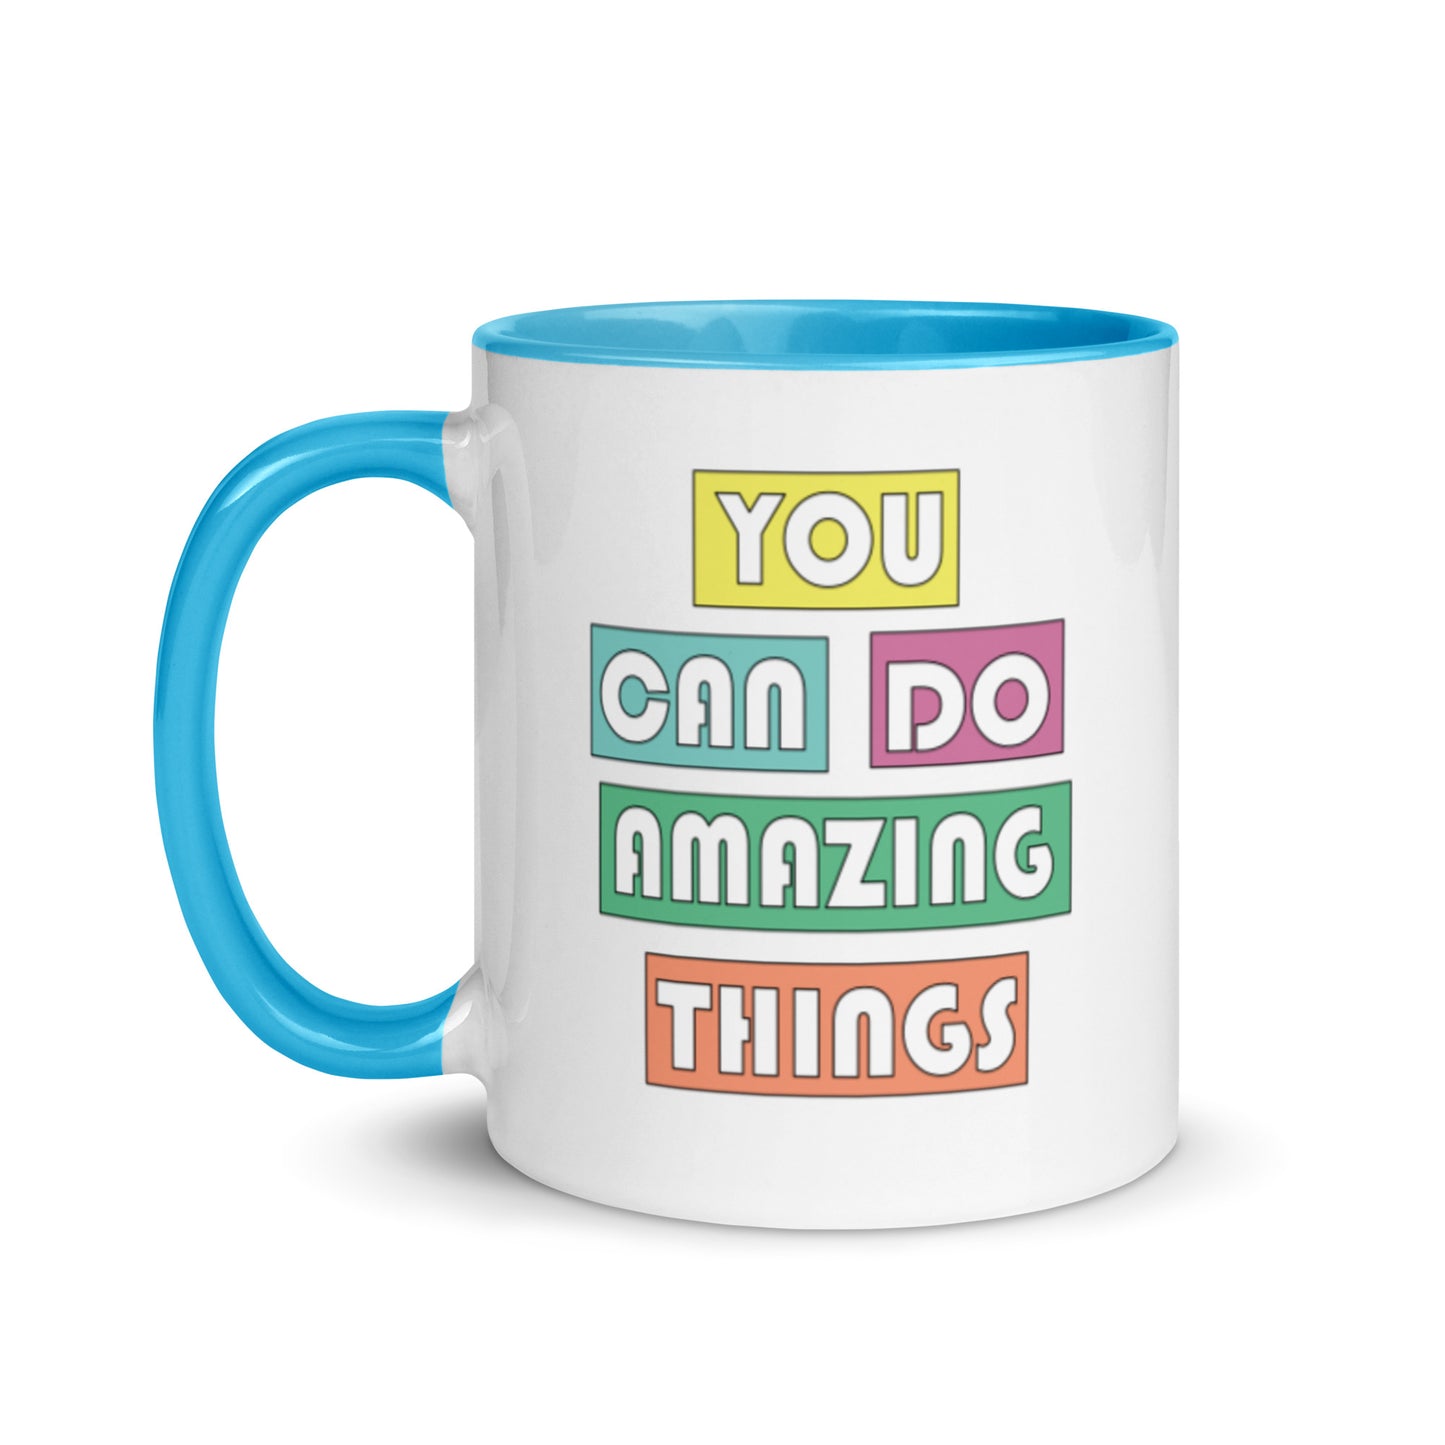 you can do amazing things mug with teal interior